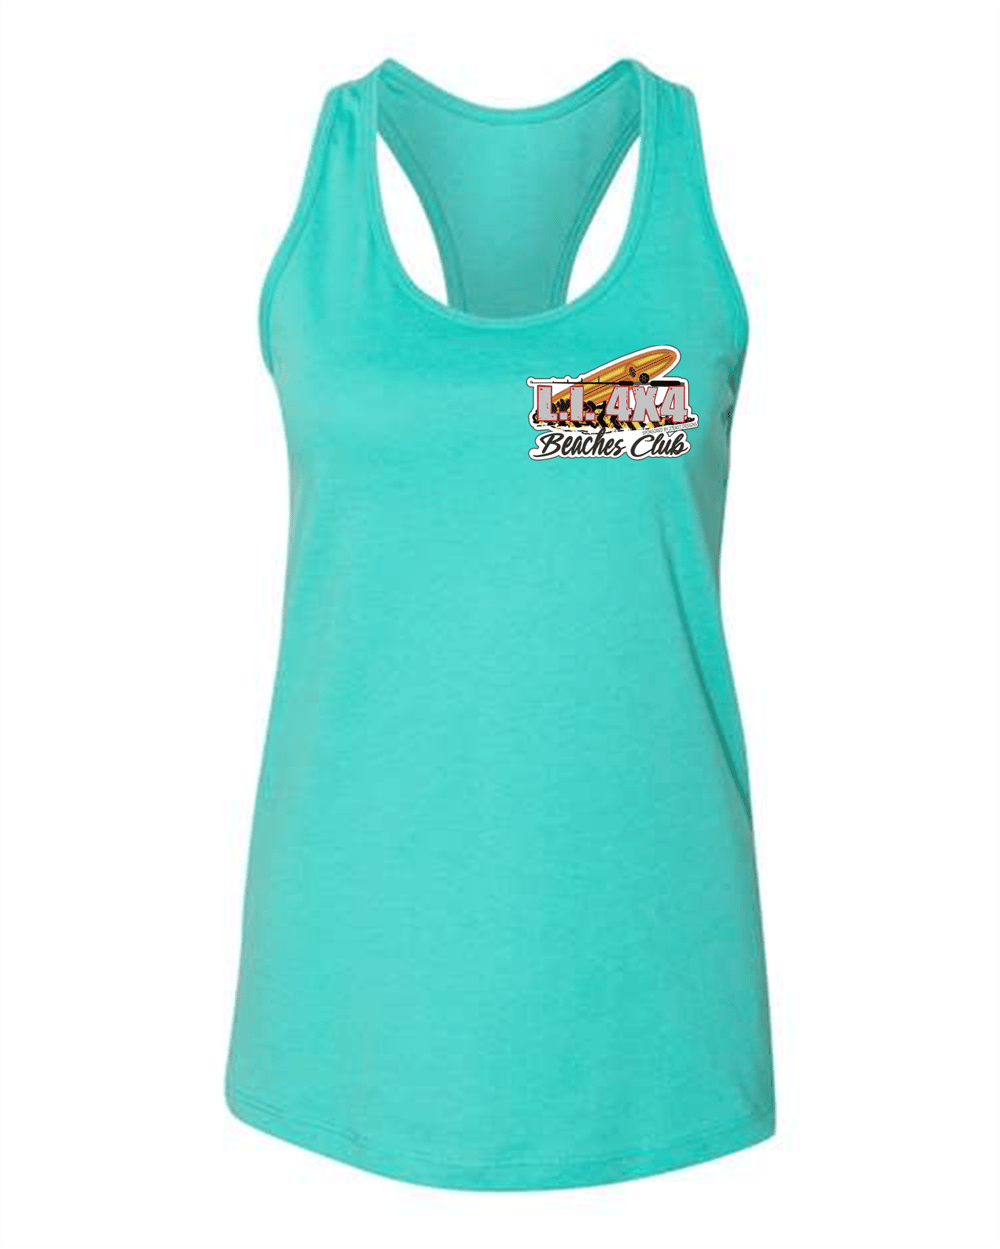 Image of Women's Club Tank Top- Teal PICK UP